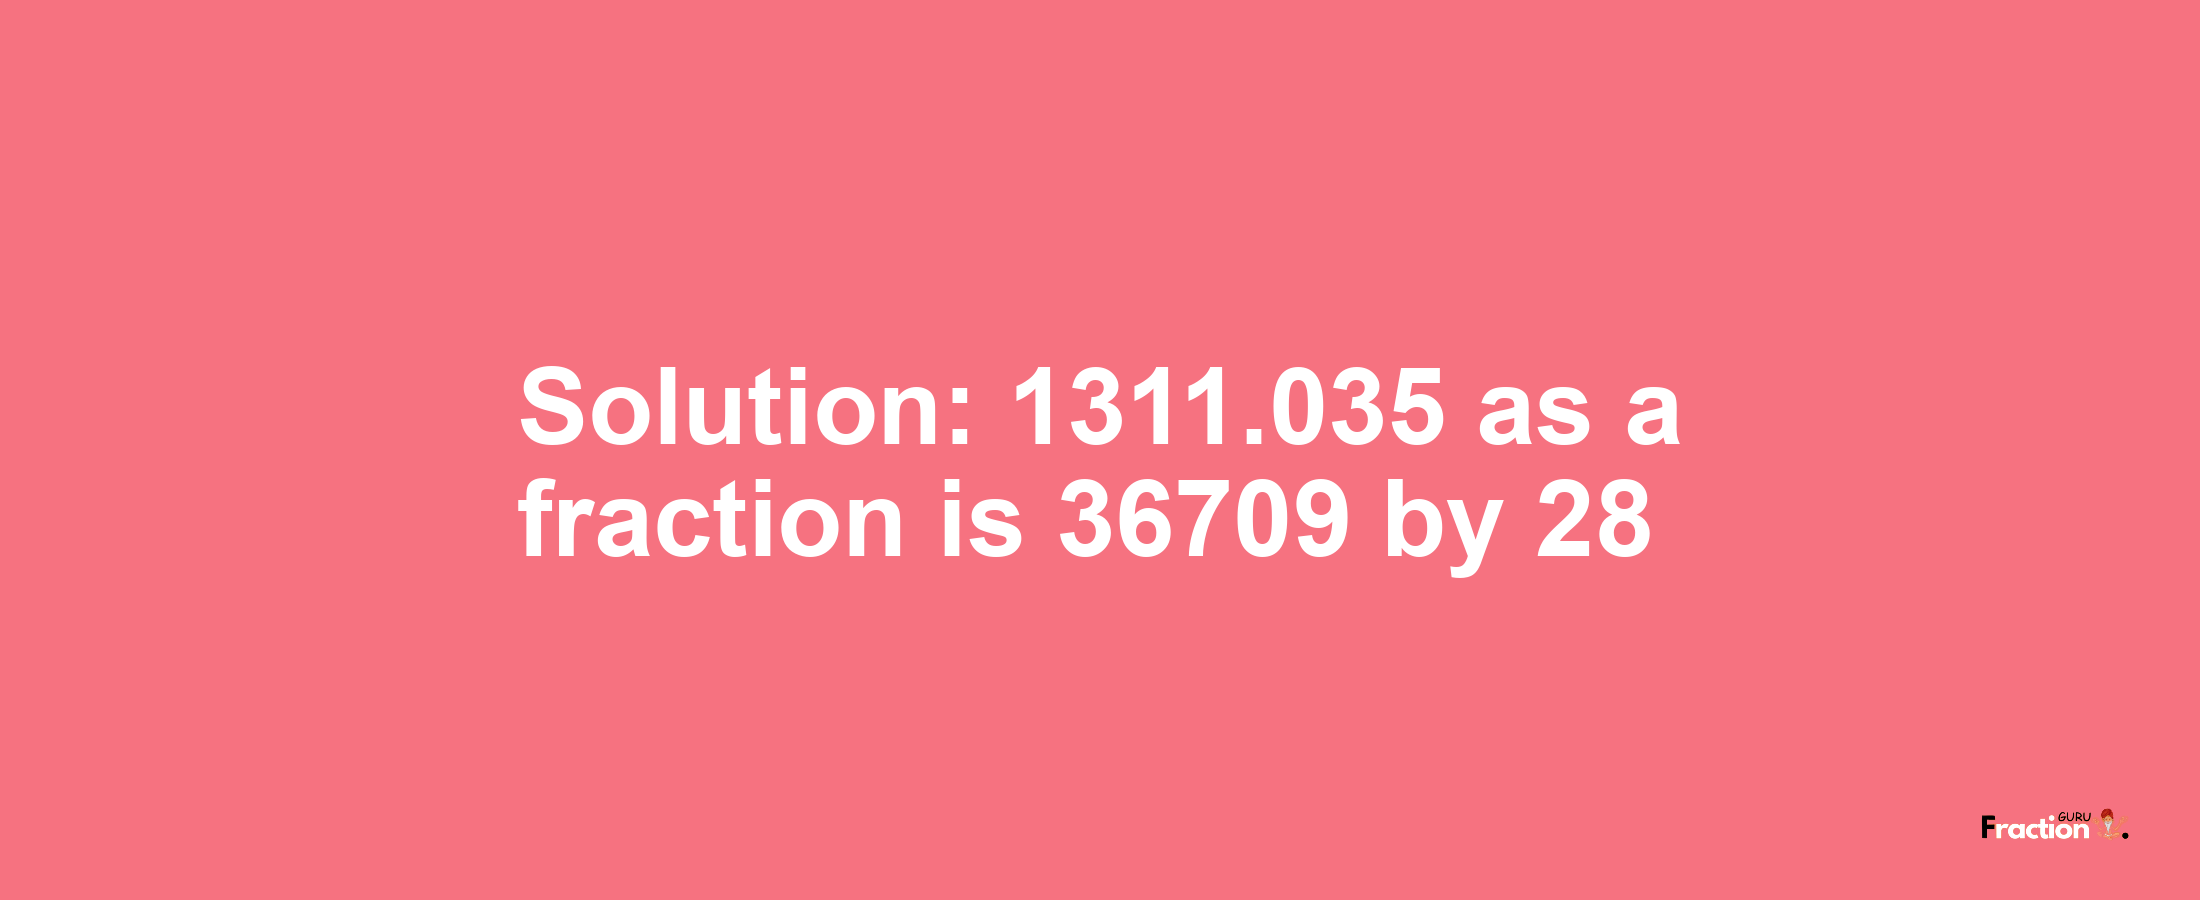 Solution:1311.035 as a fraction is 36709/28